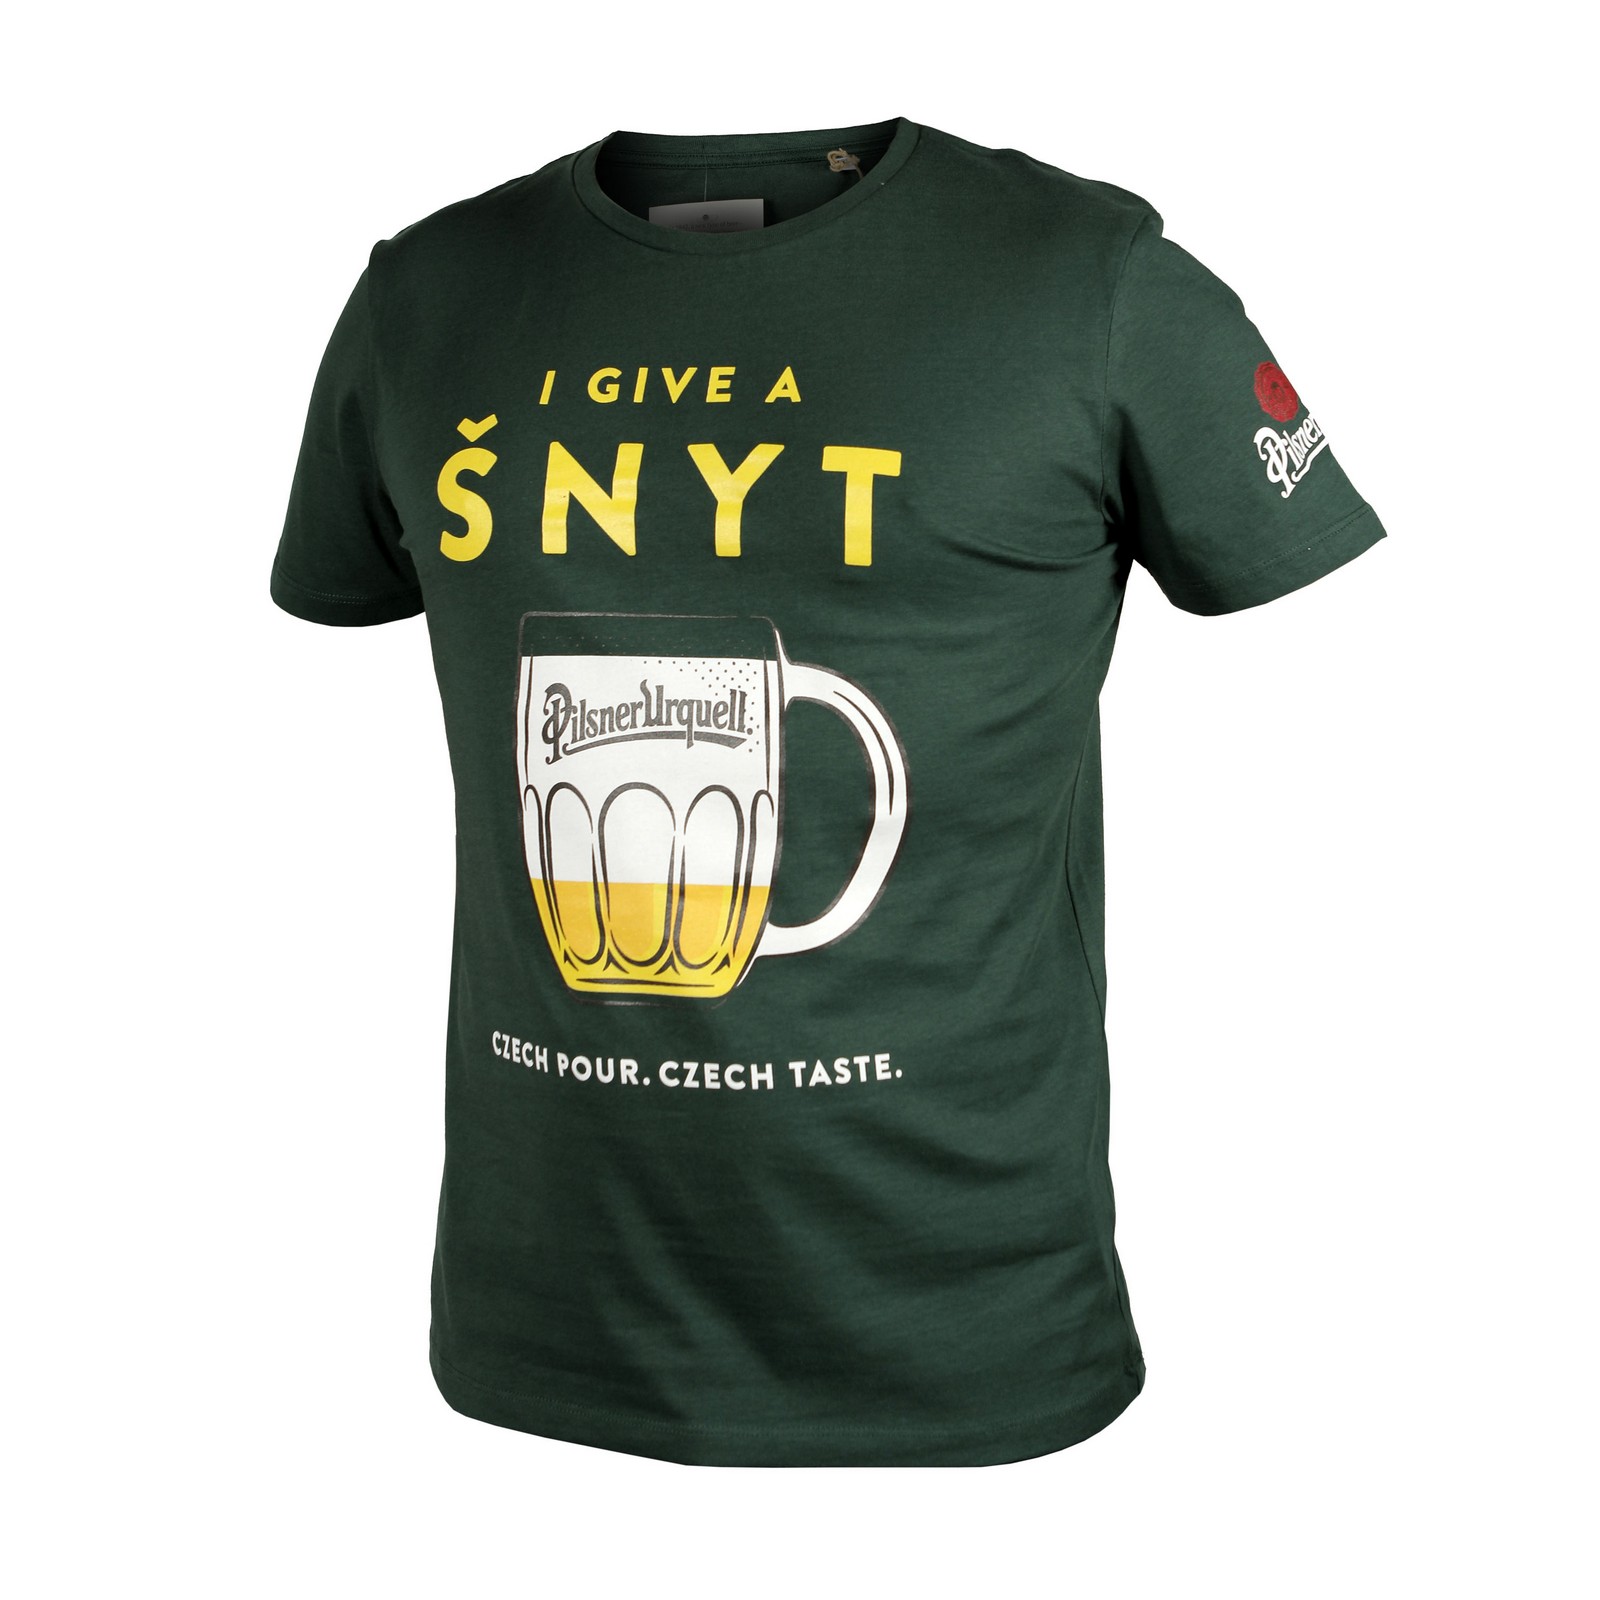 The Perfect Pour T-shirt